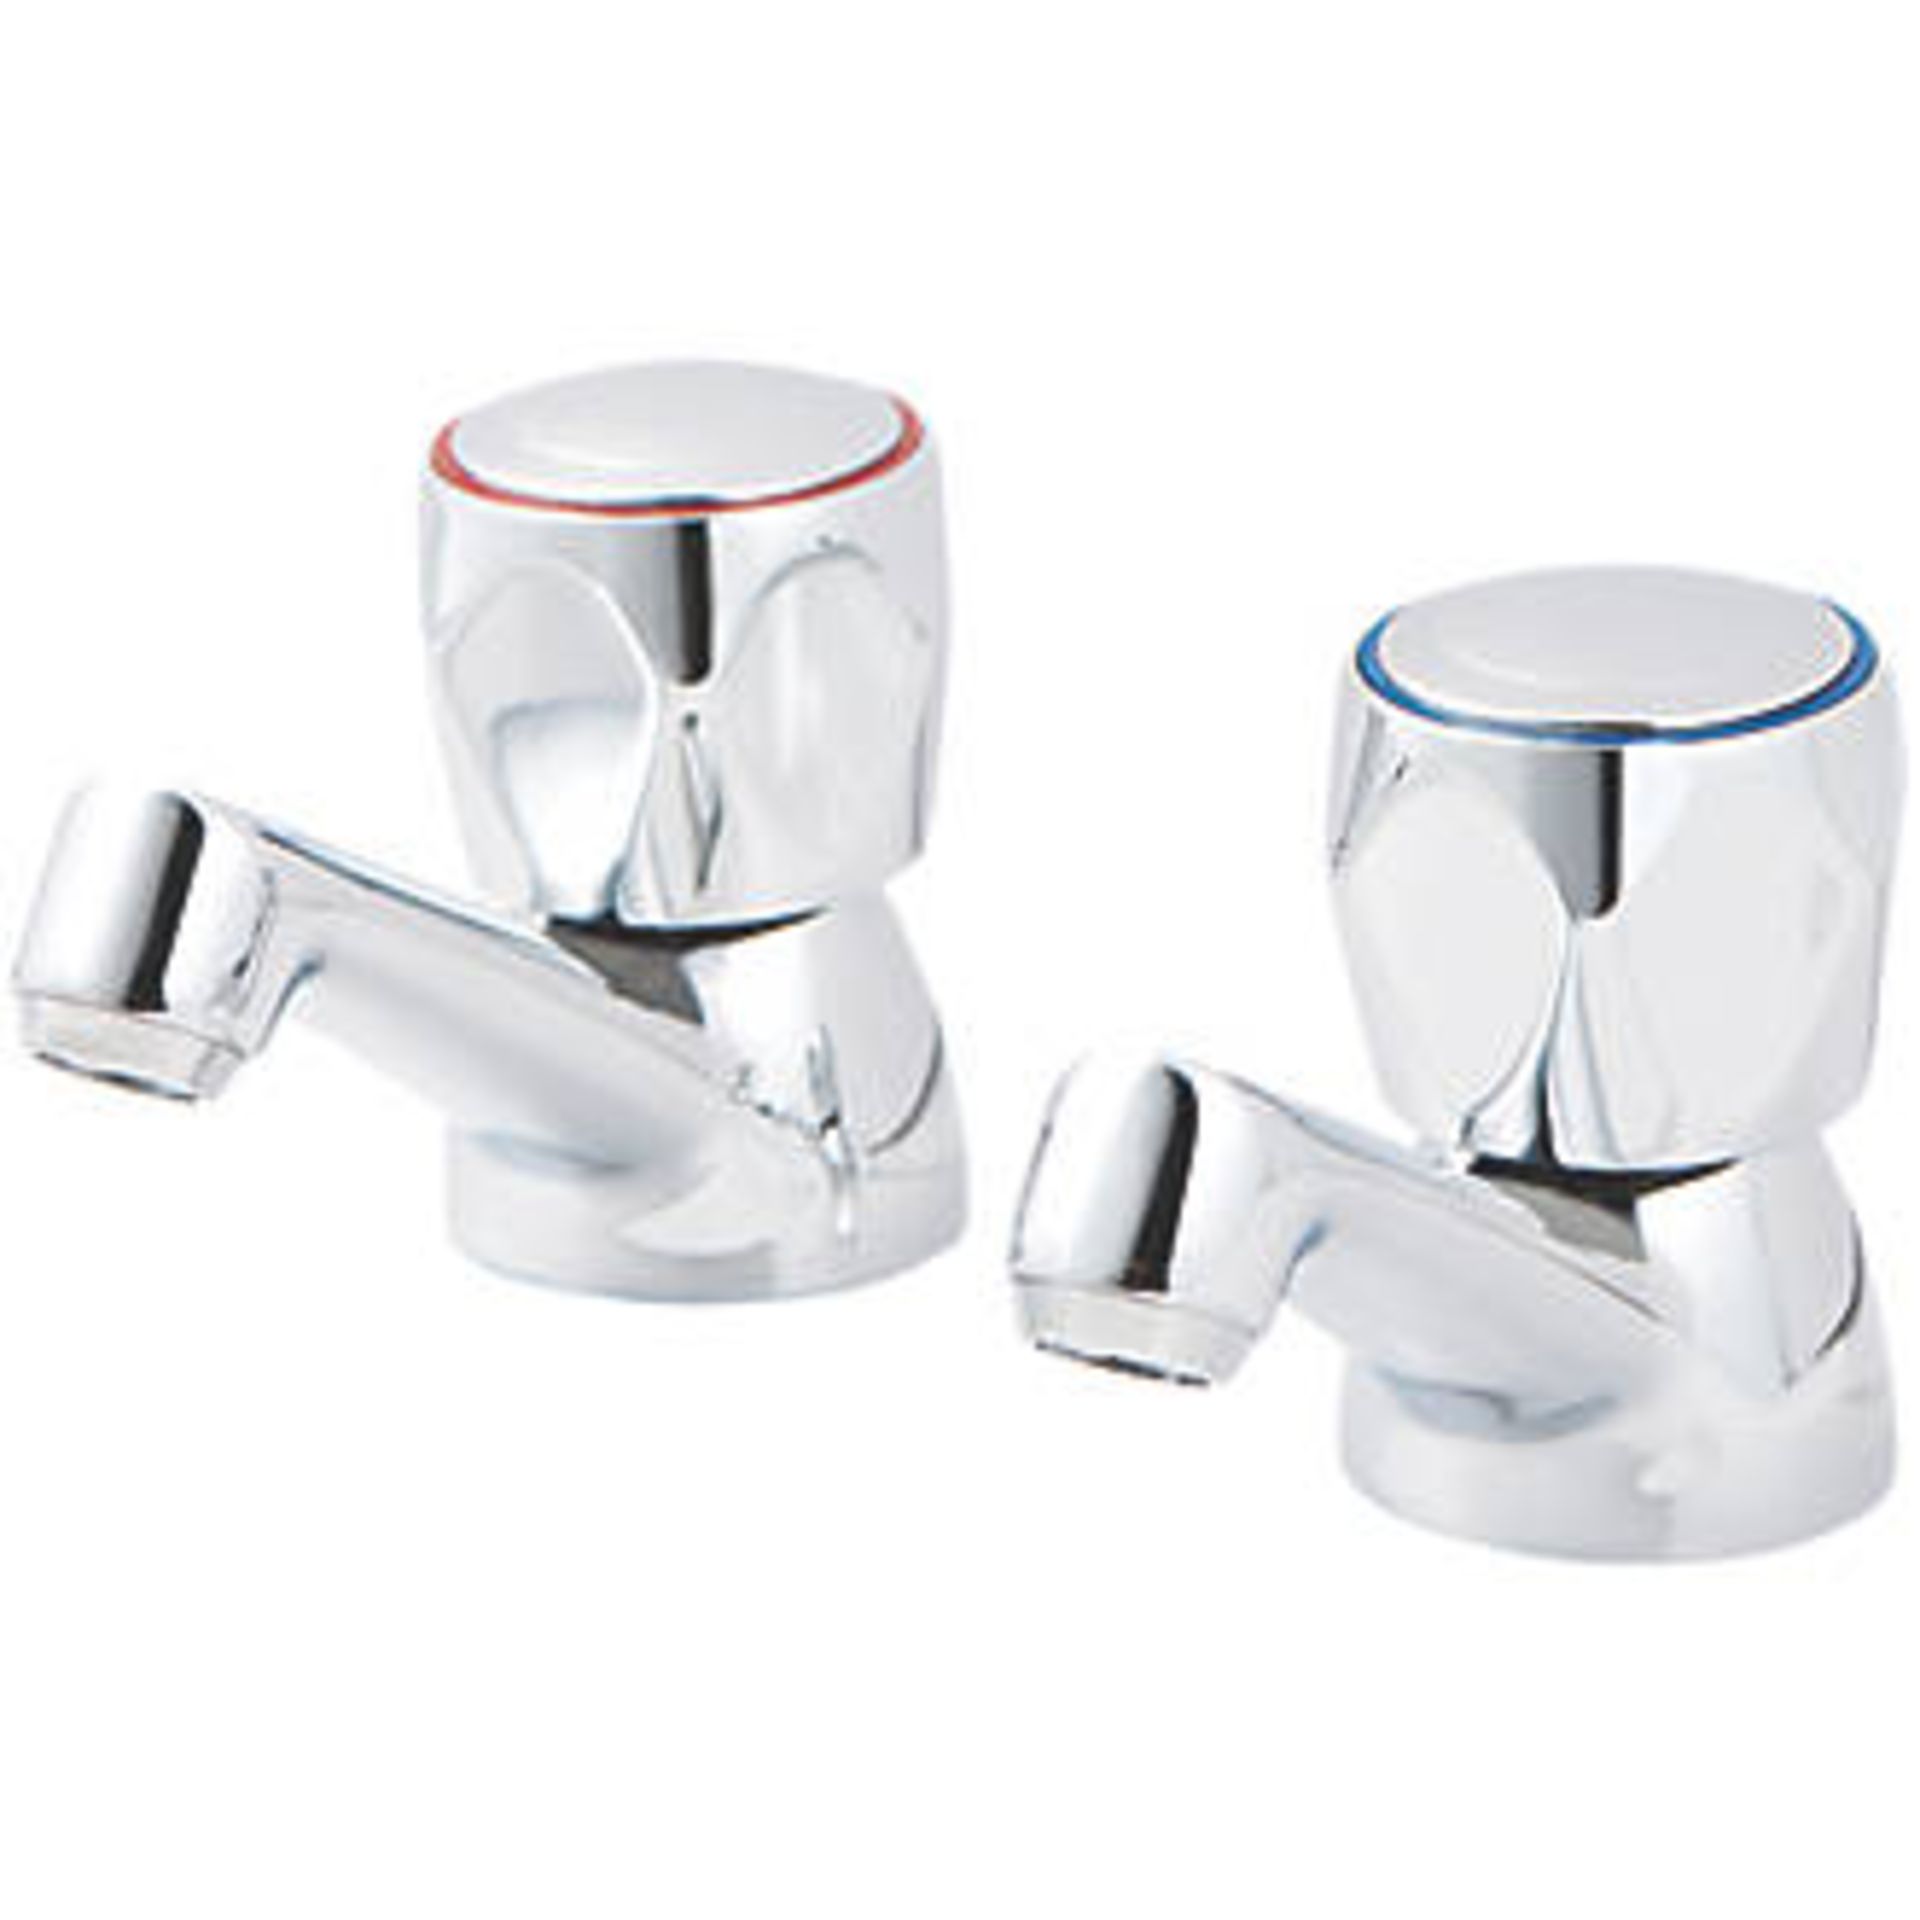 NEW (REF275) Calp Chrome-plated Bath Pillar Tap, Pack of 2. This traditional style chrome bath ...